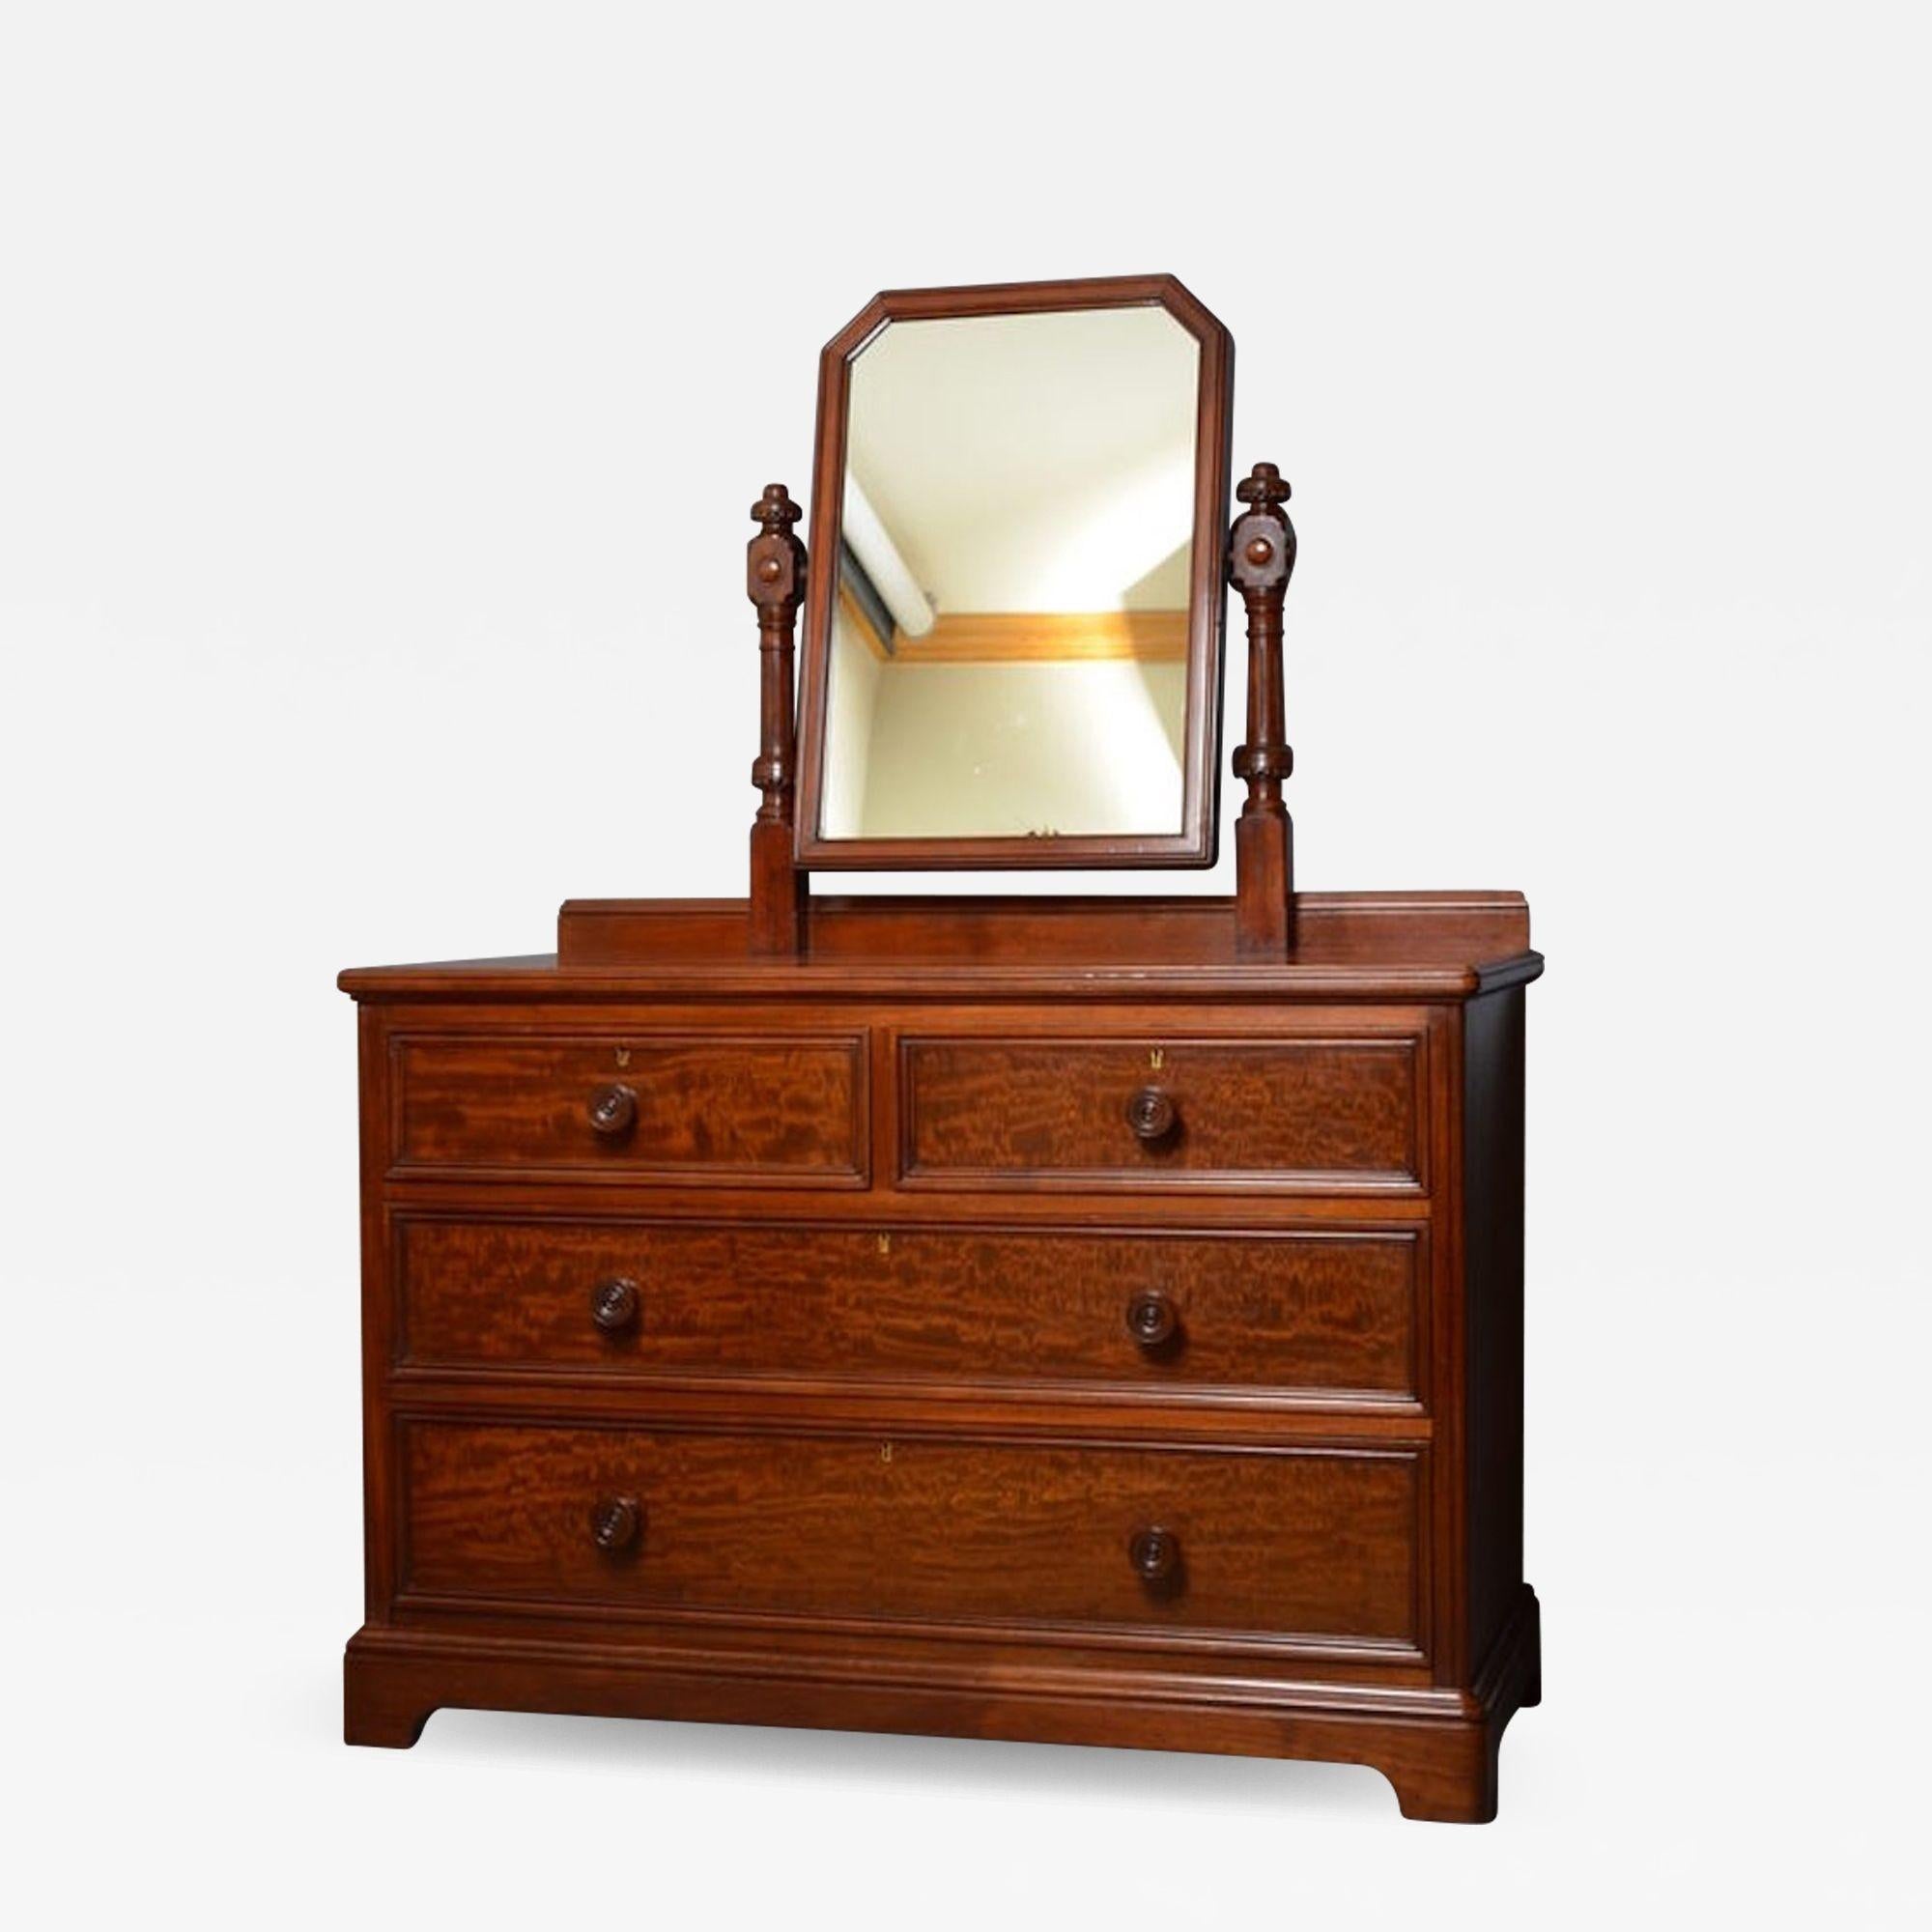 Sn2637, superb quality and very attractive, Victorian, mahogany dressing chest of drawers in the manners of Gillows, having shaped mirror enclosed by fluted and carved uprights, figured mahogany, moulded top with 2 short and 2 long graduated and